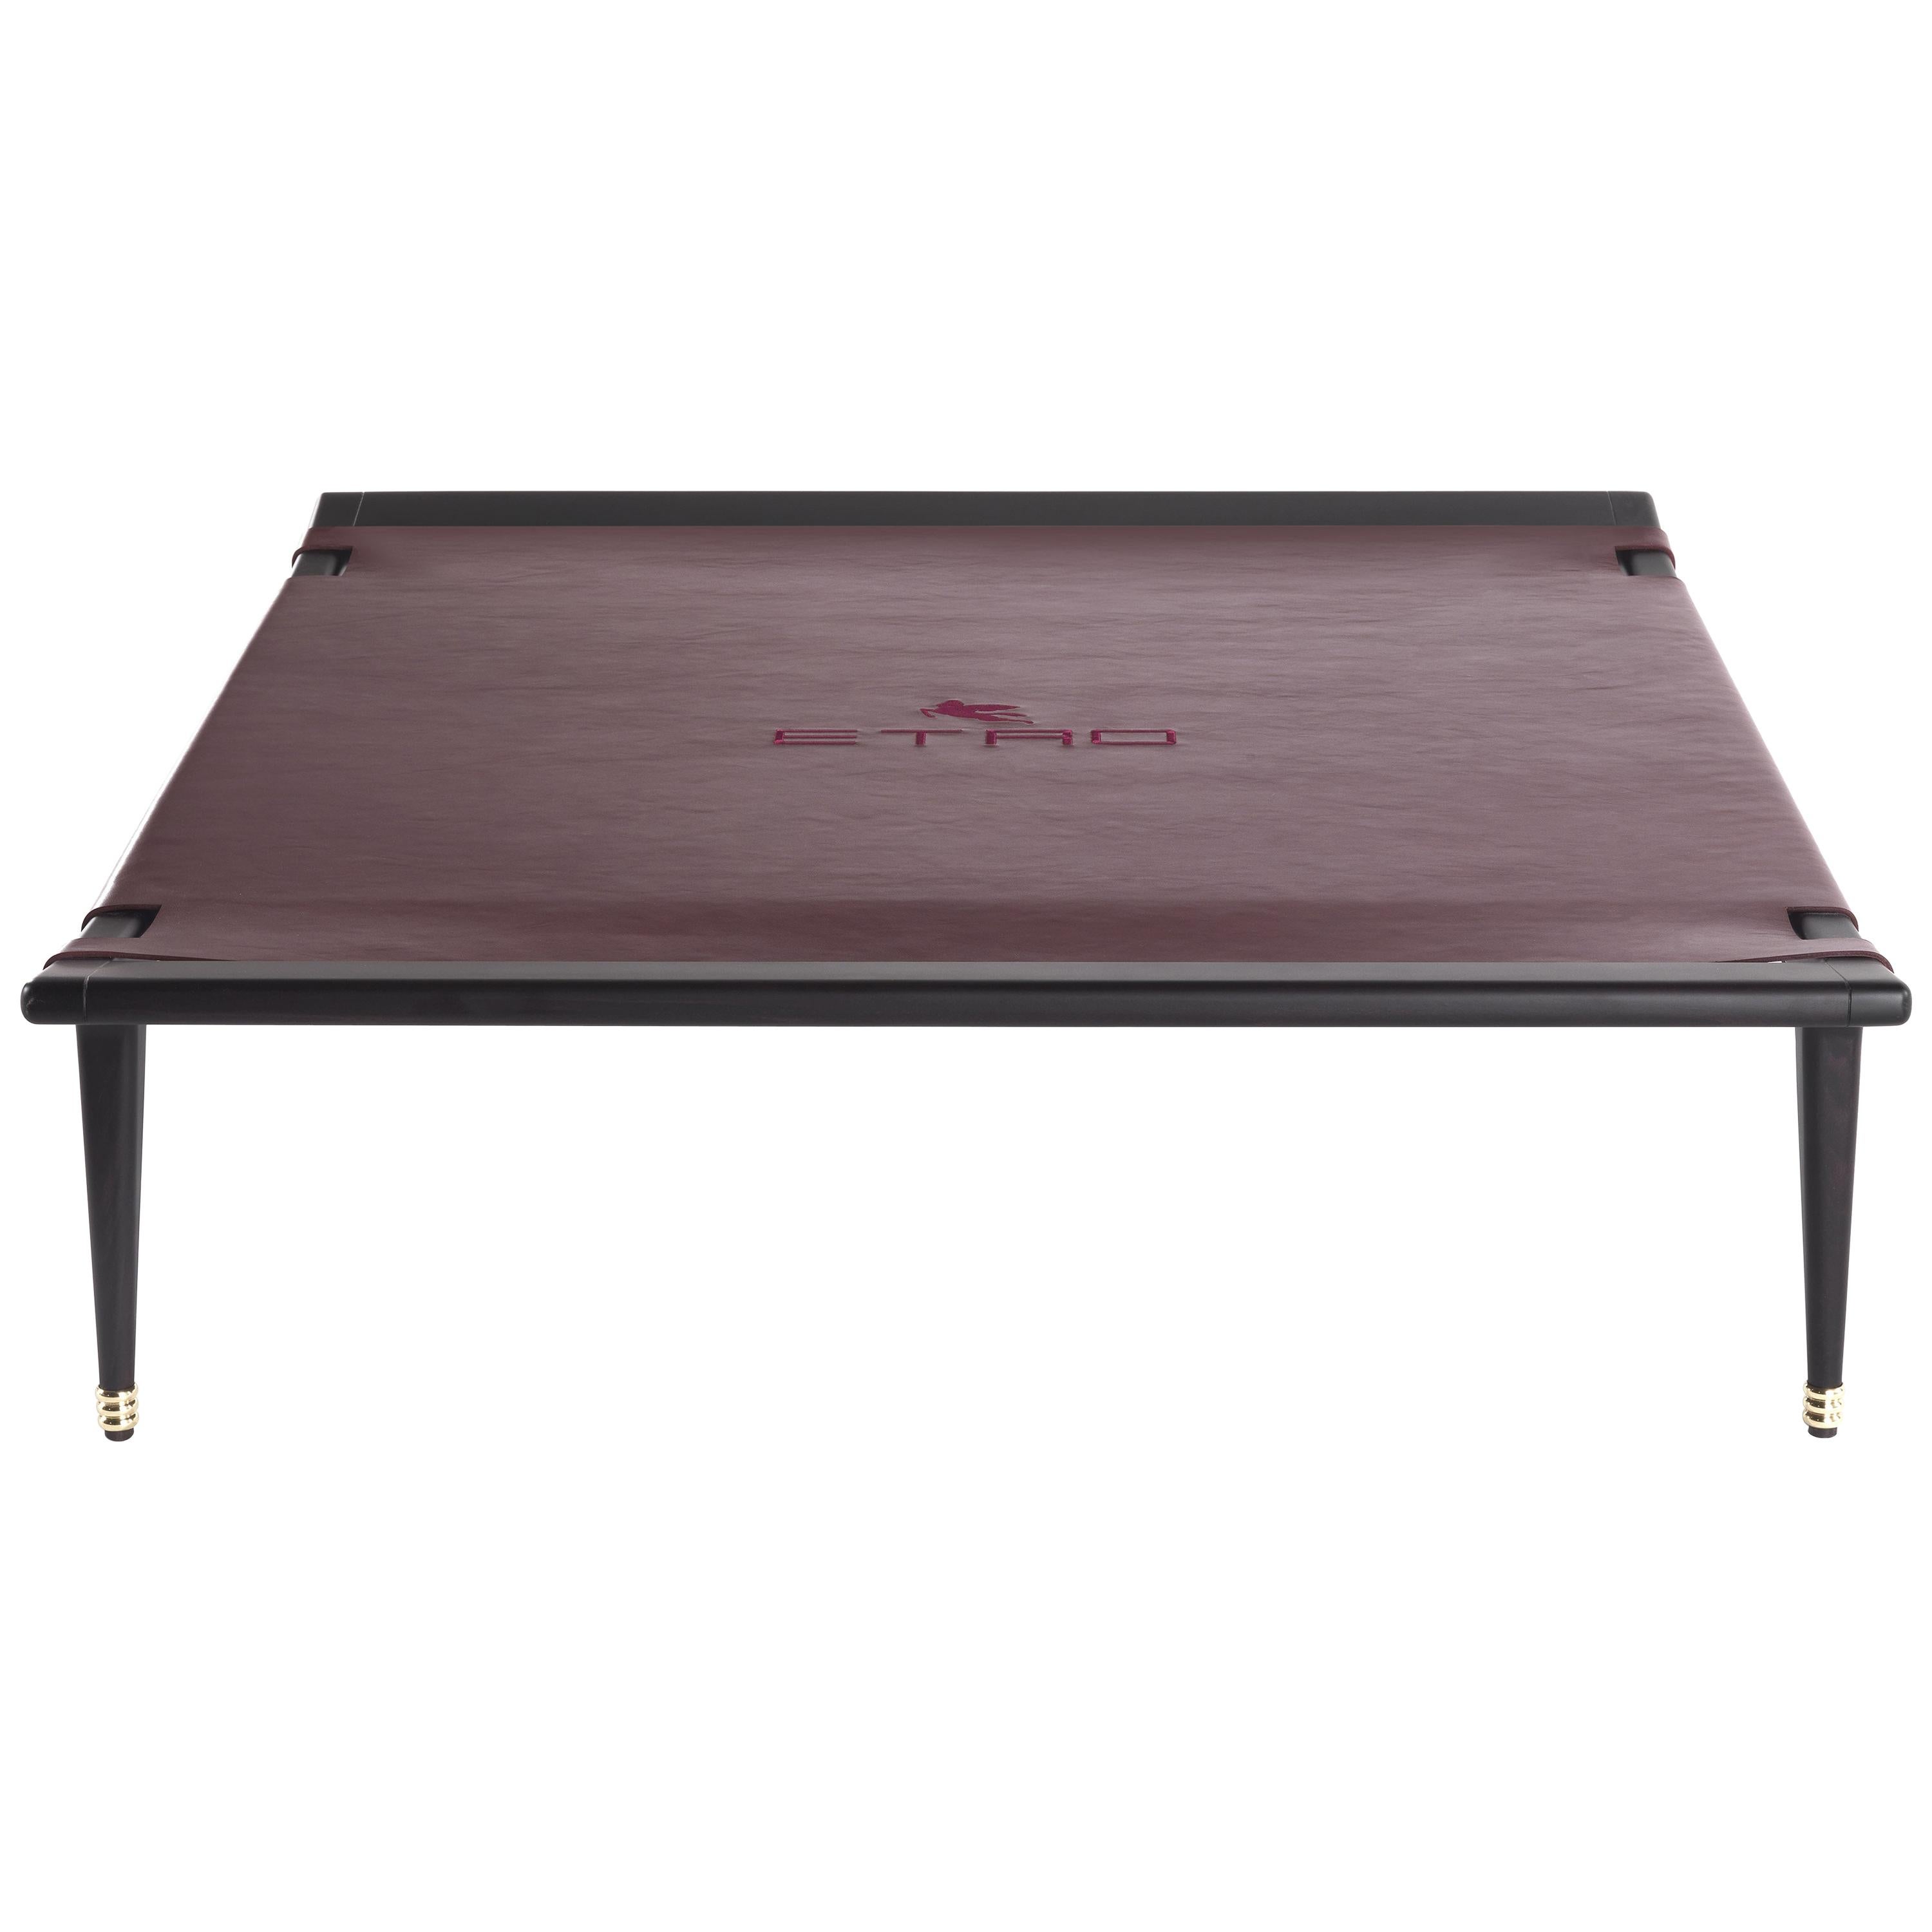 21st Century Dinka Central Table in Wood and Leather by Etro Home Interiors